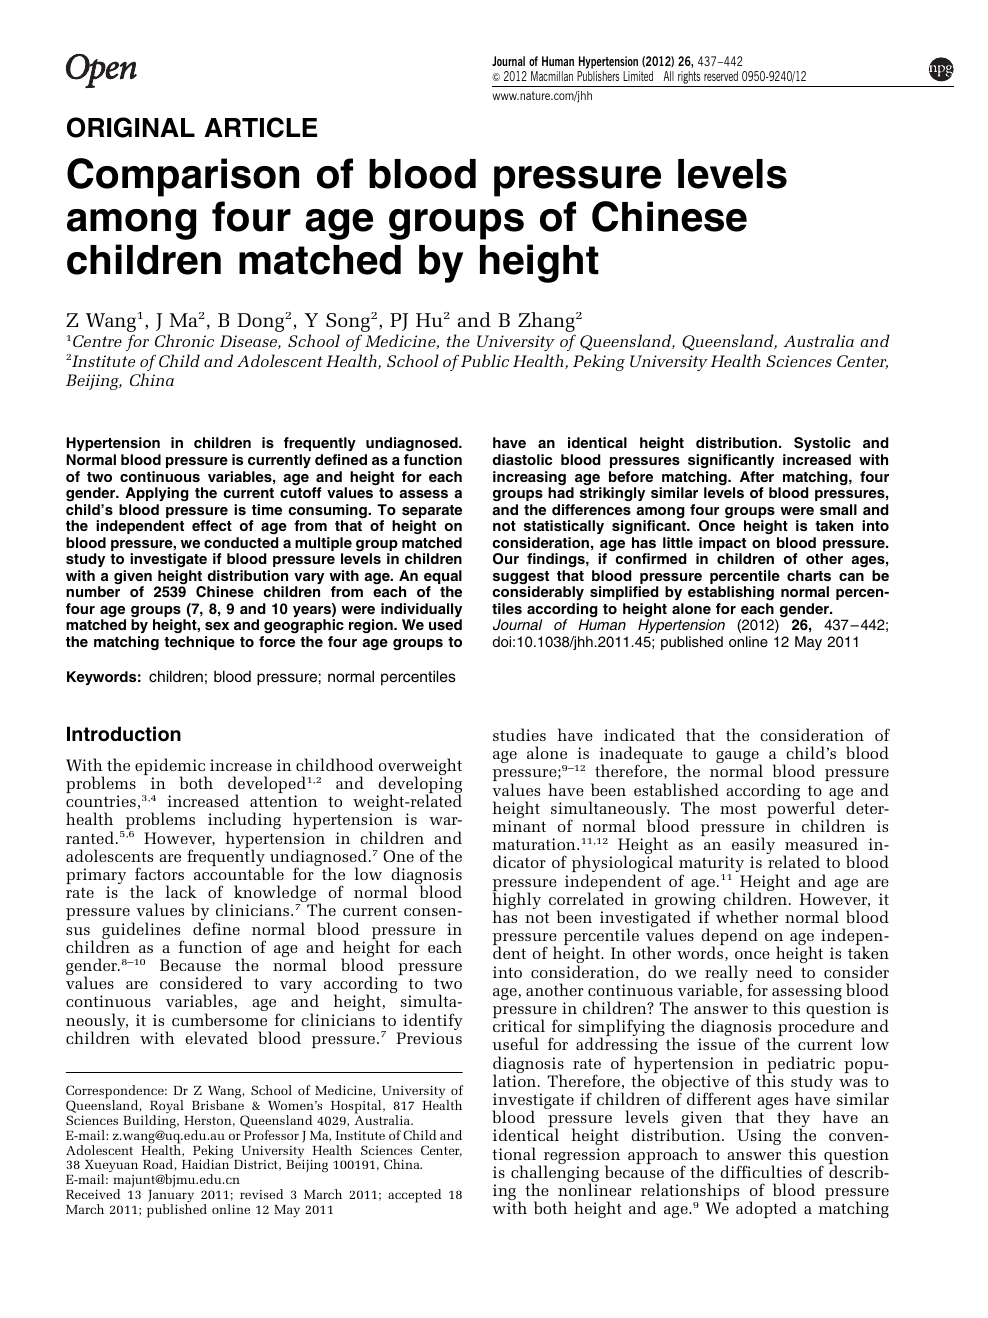 Comparison Of Blood Pressure Levels Among Four Age Groups Of Chinese Children Matched By Height Topic Of Research Paper In Health Sciences Download Scholarly Article Pdf And Read For Free On